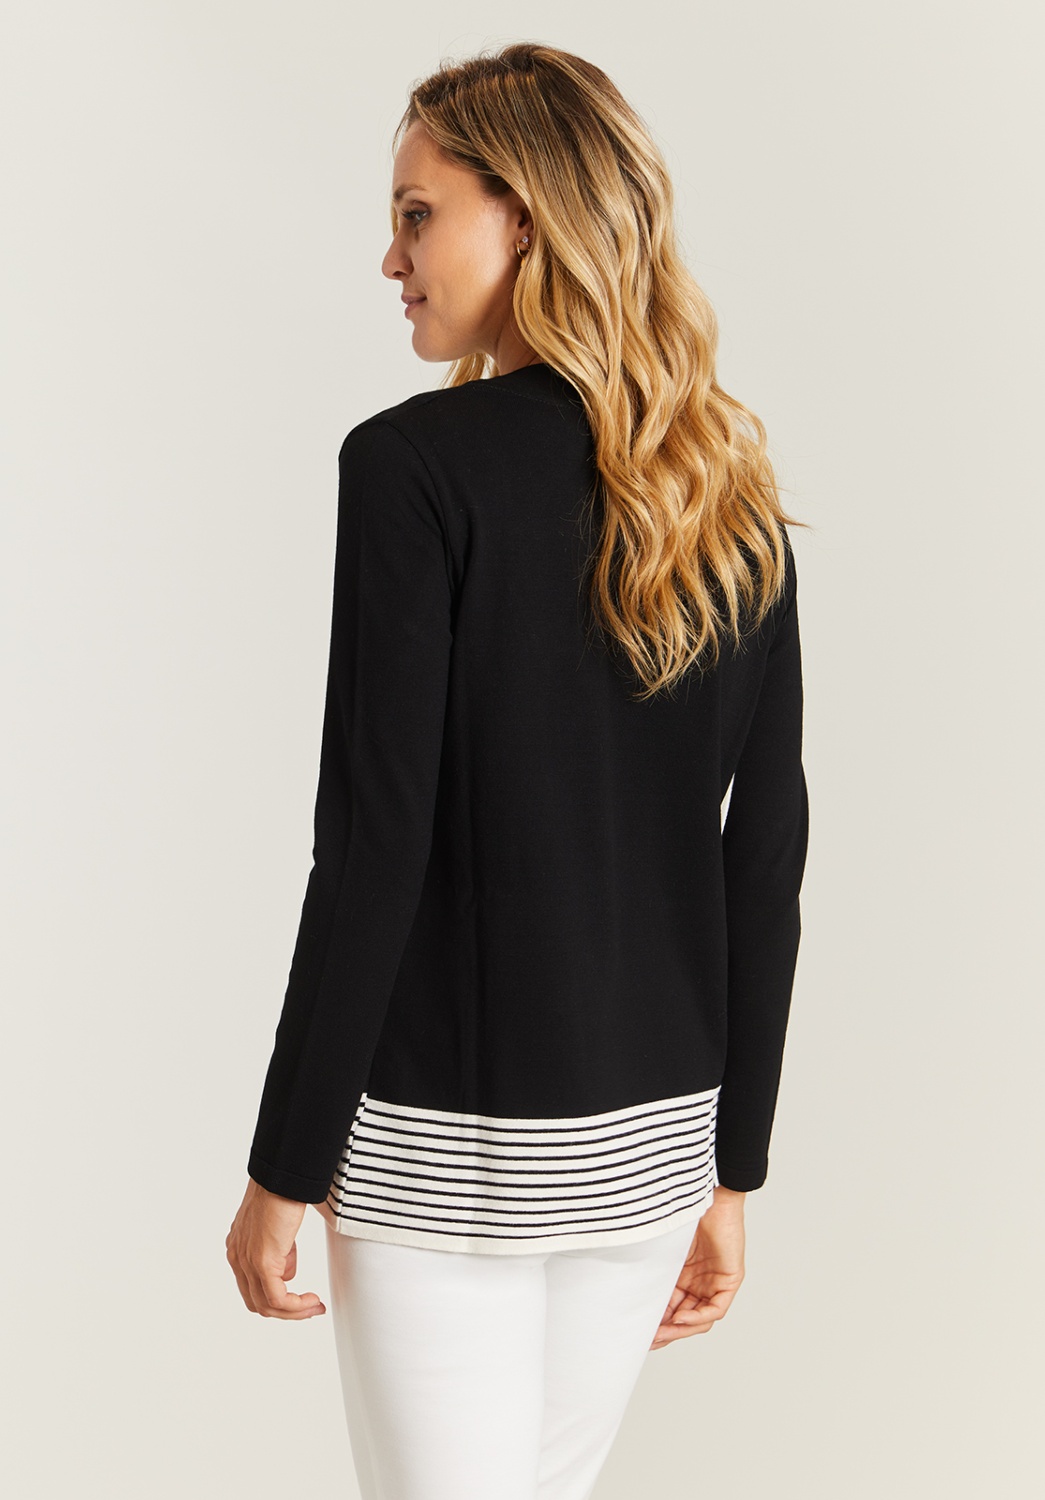 Black Sweater With Stripes 2